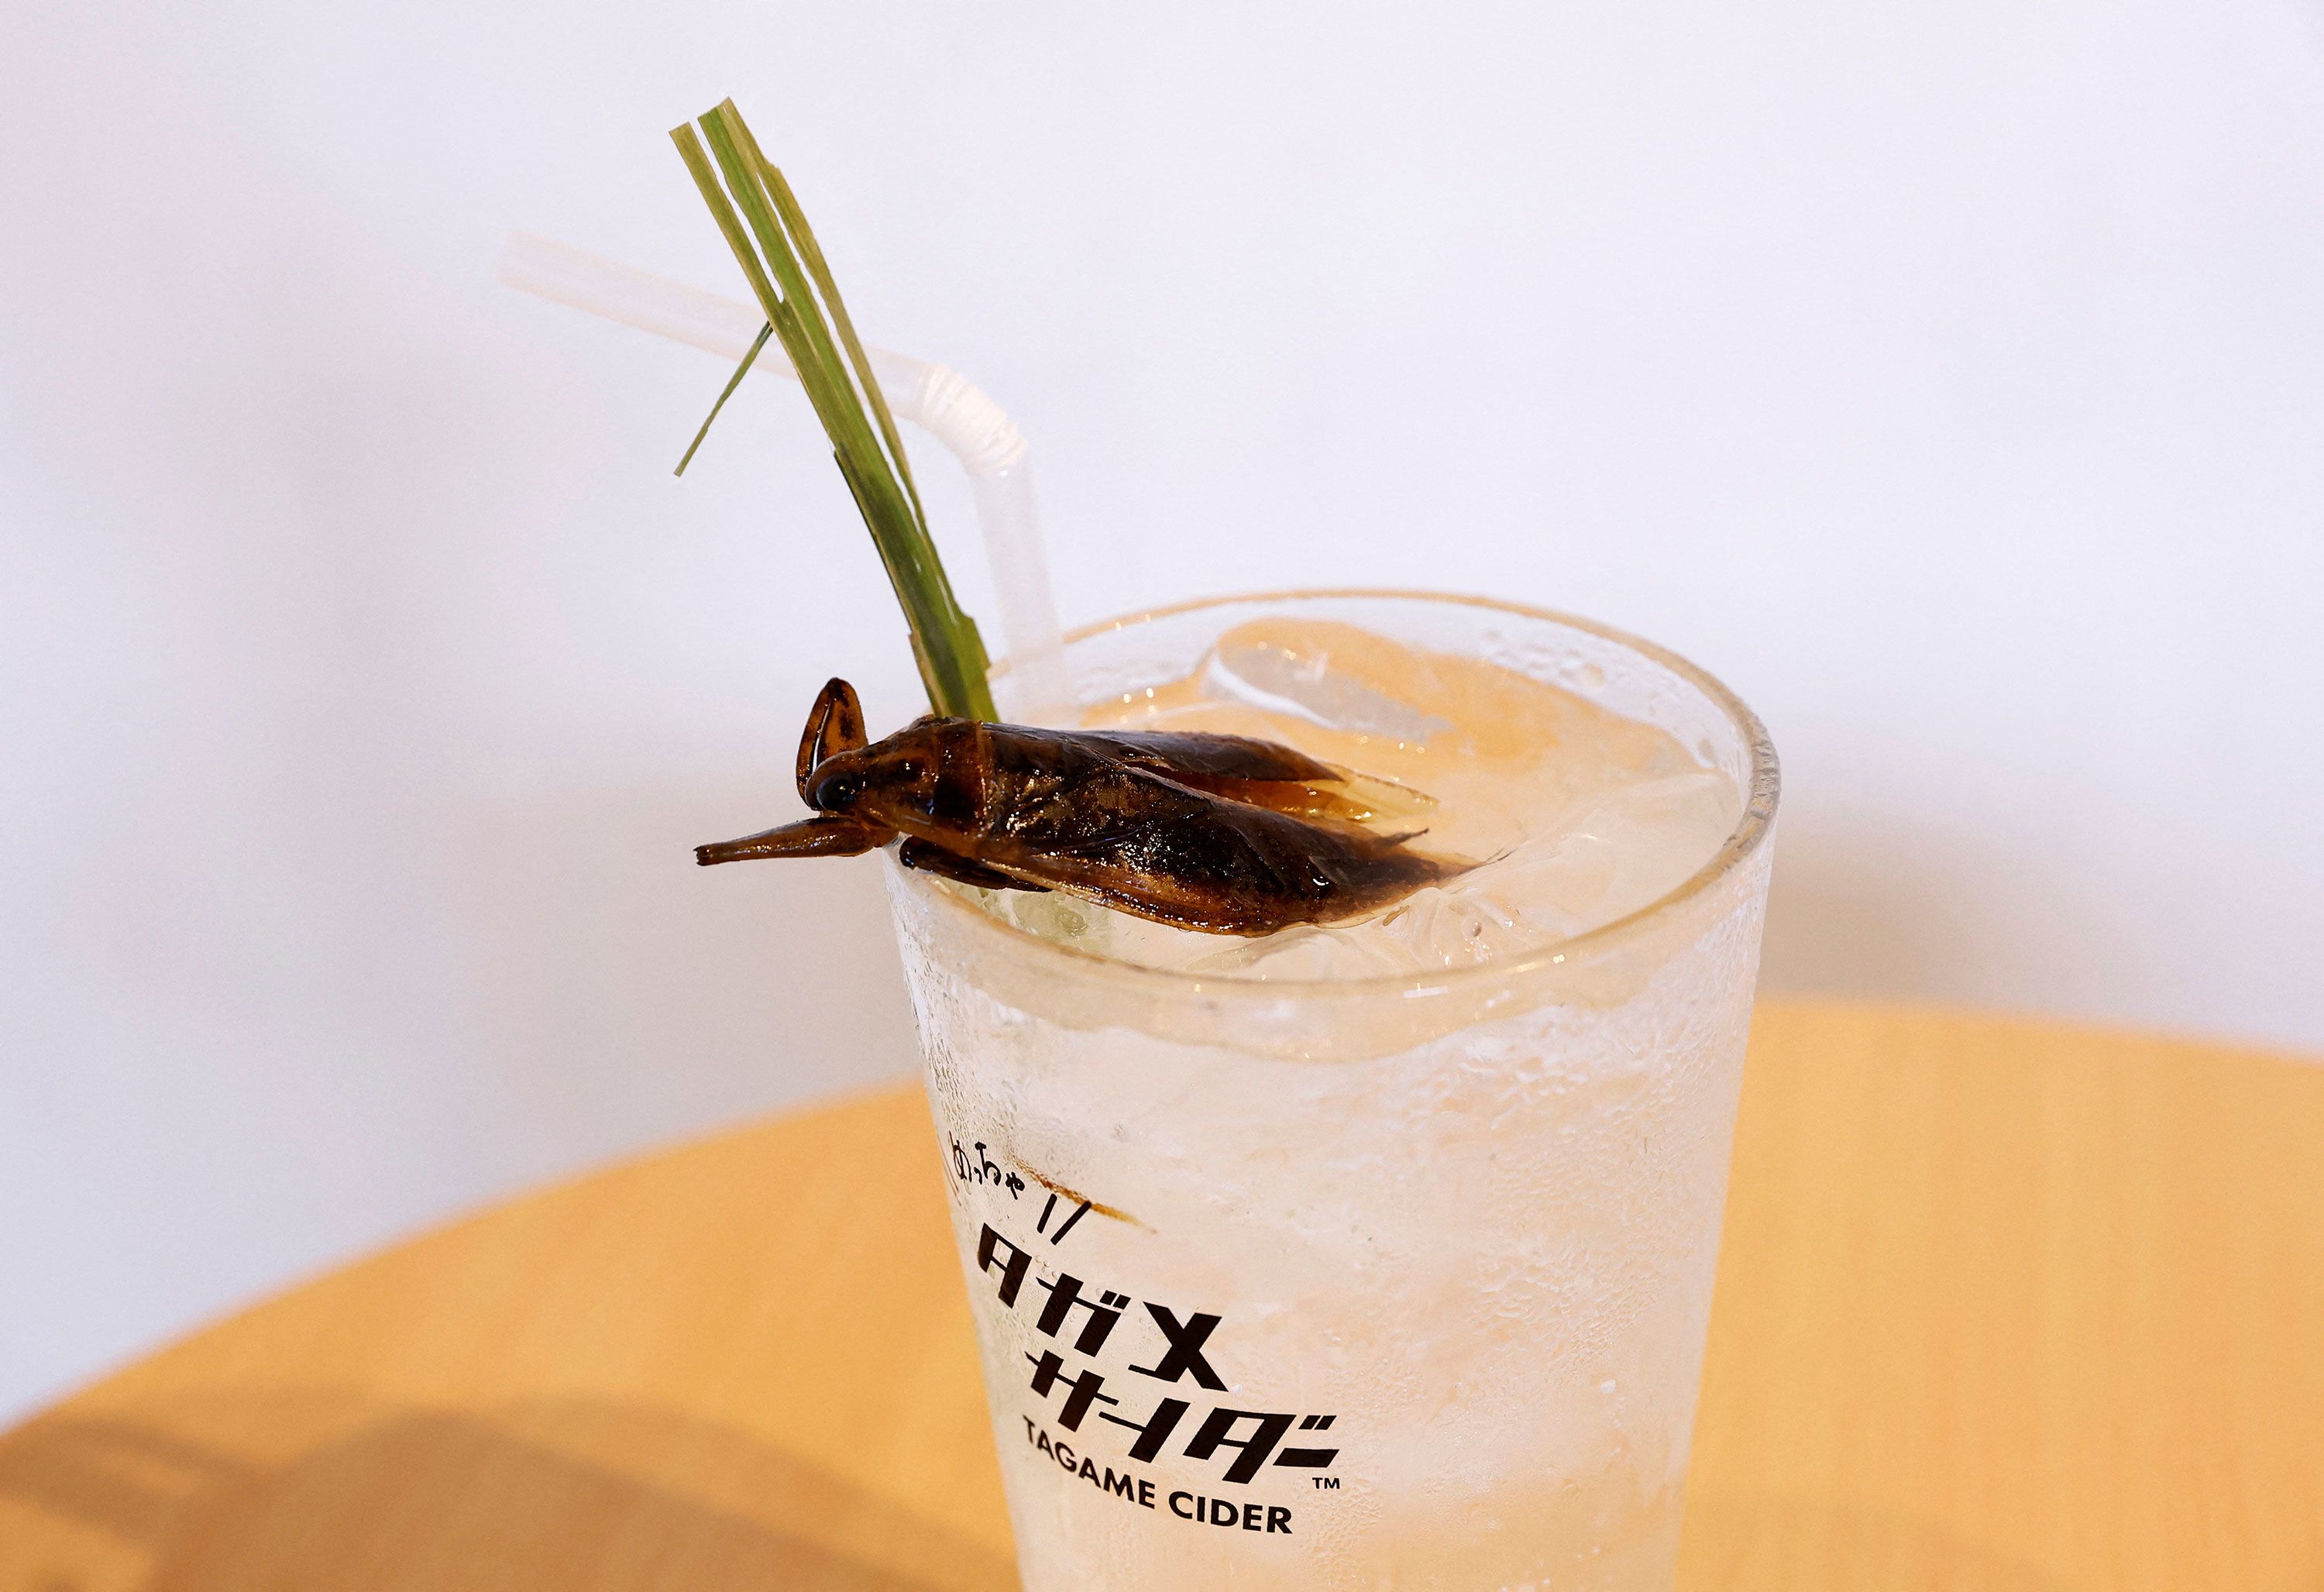 Tagame Cider, a carbonated drink made with the extract of giant water bugs and garnished with a dried version of the insect, is pictured at Take-Noko cafe in Tokyo, Japan, July 21, 2023. REUTERS/Kim Kyung-Hoon